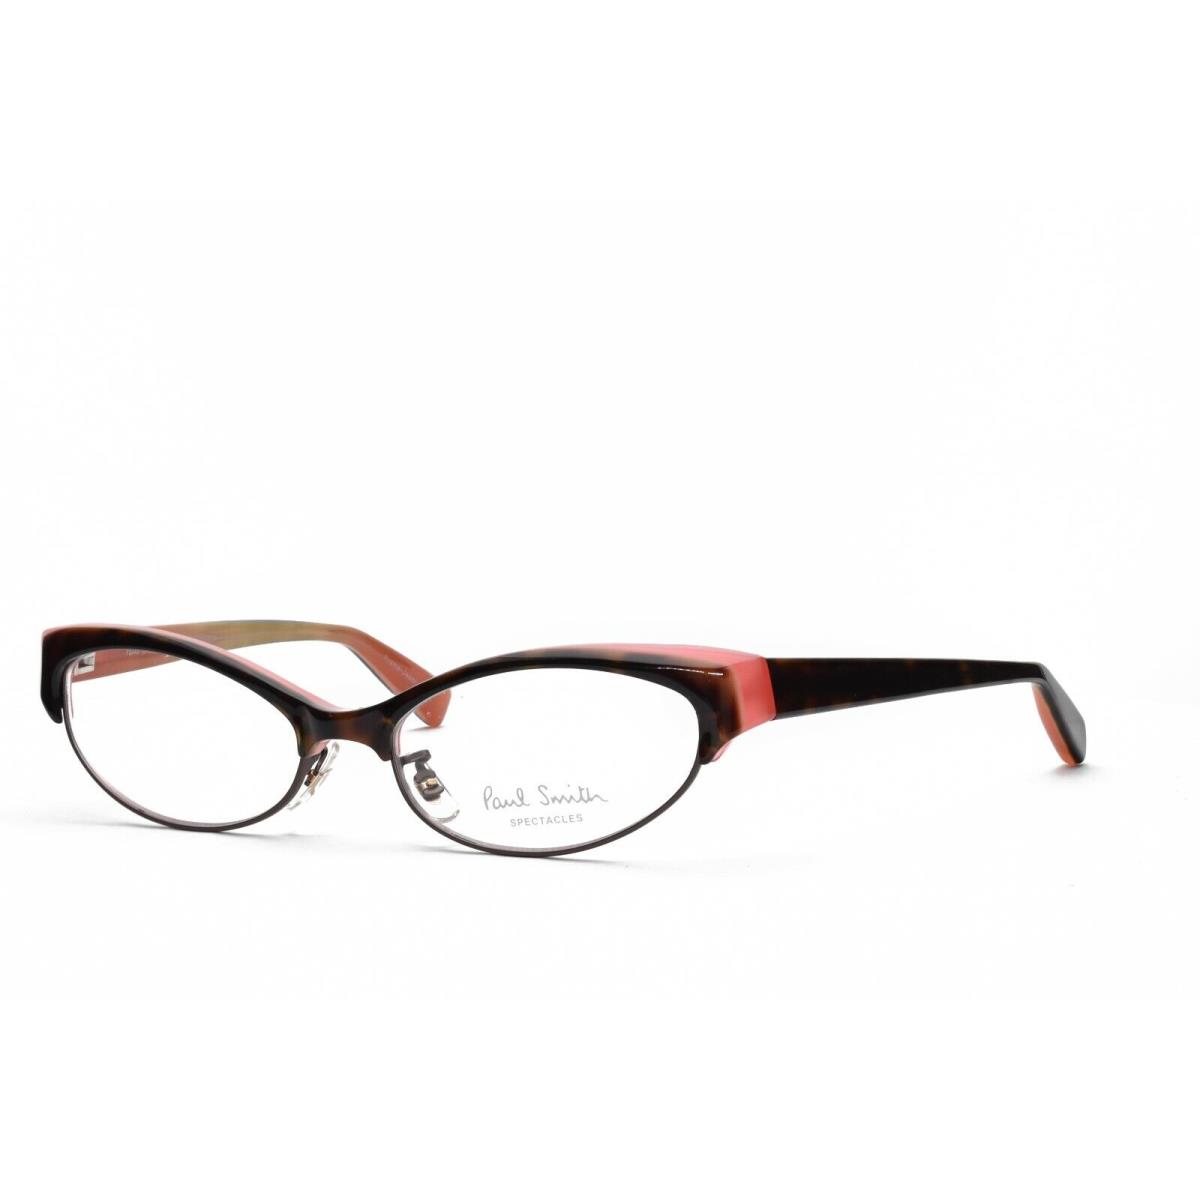 Paul Smith PS 412 Oabl Eyeglasses Frames Only 50-16-135